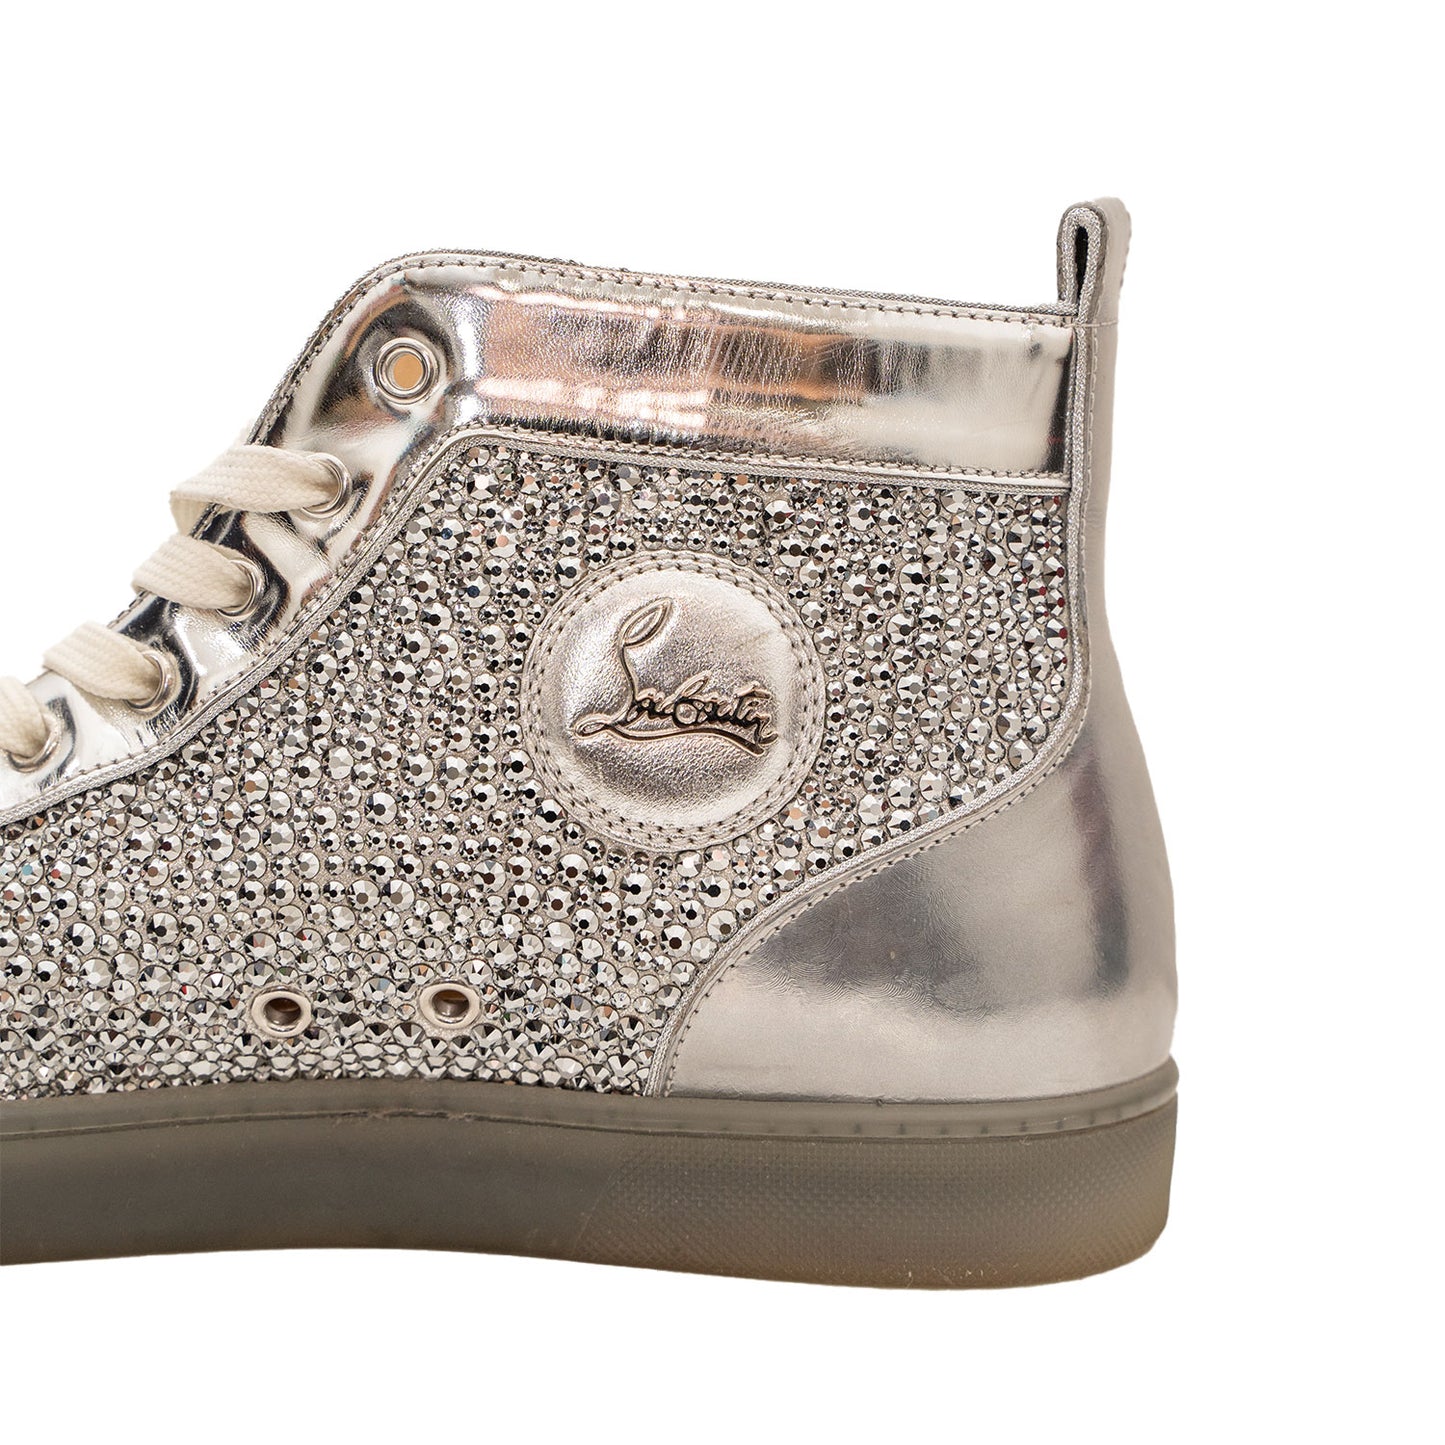 Christain Louboutin Swarovski Crystal silver Bedazzled Leather Mid-Top Sneaker